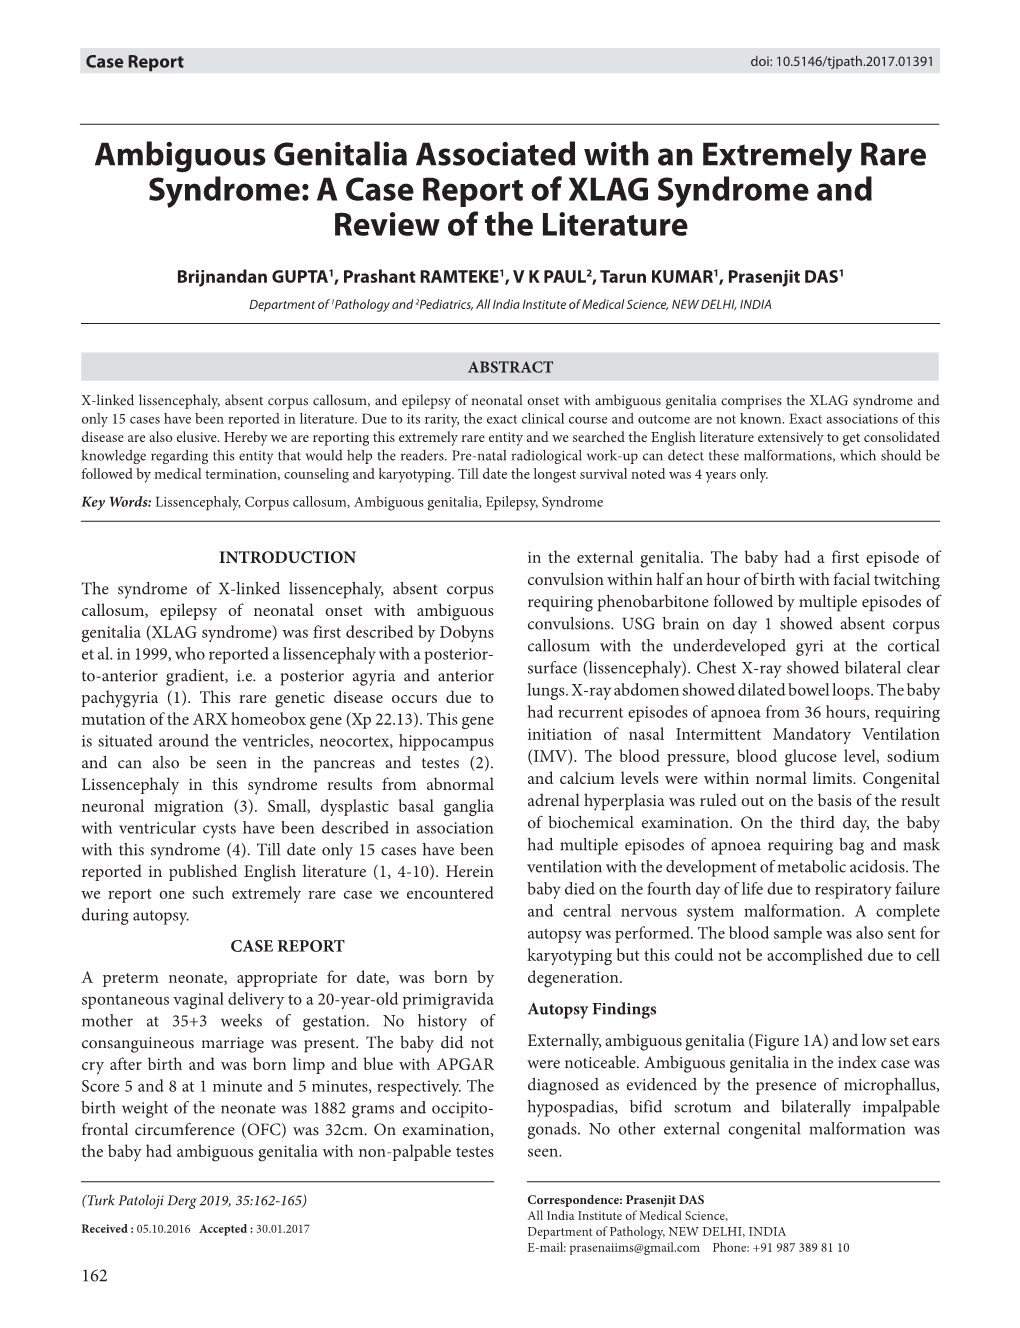 Ambiguous Genitalia Associated with an Extremely Rare Syndrome: a Case Report of XLAG Syndrome and Review of the Literature